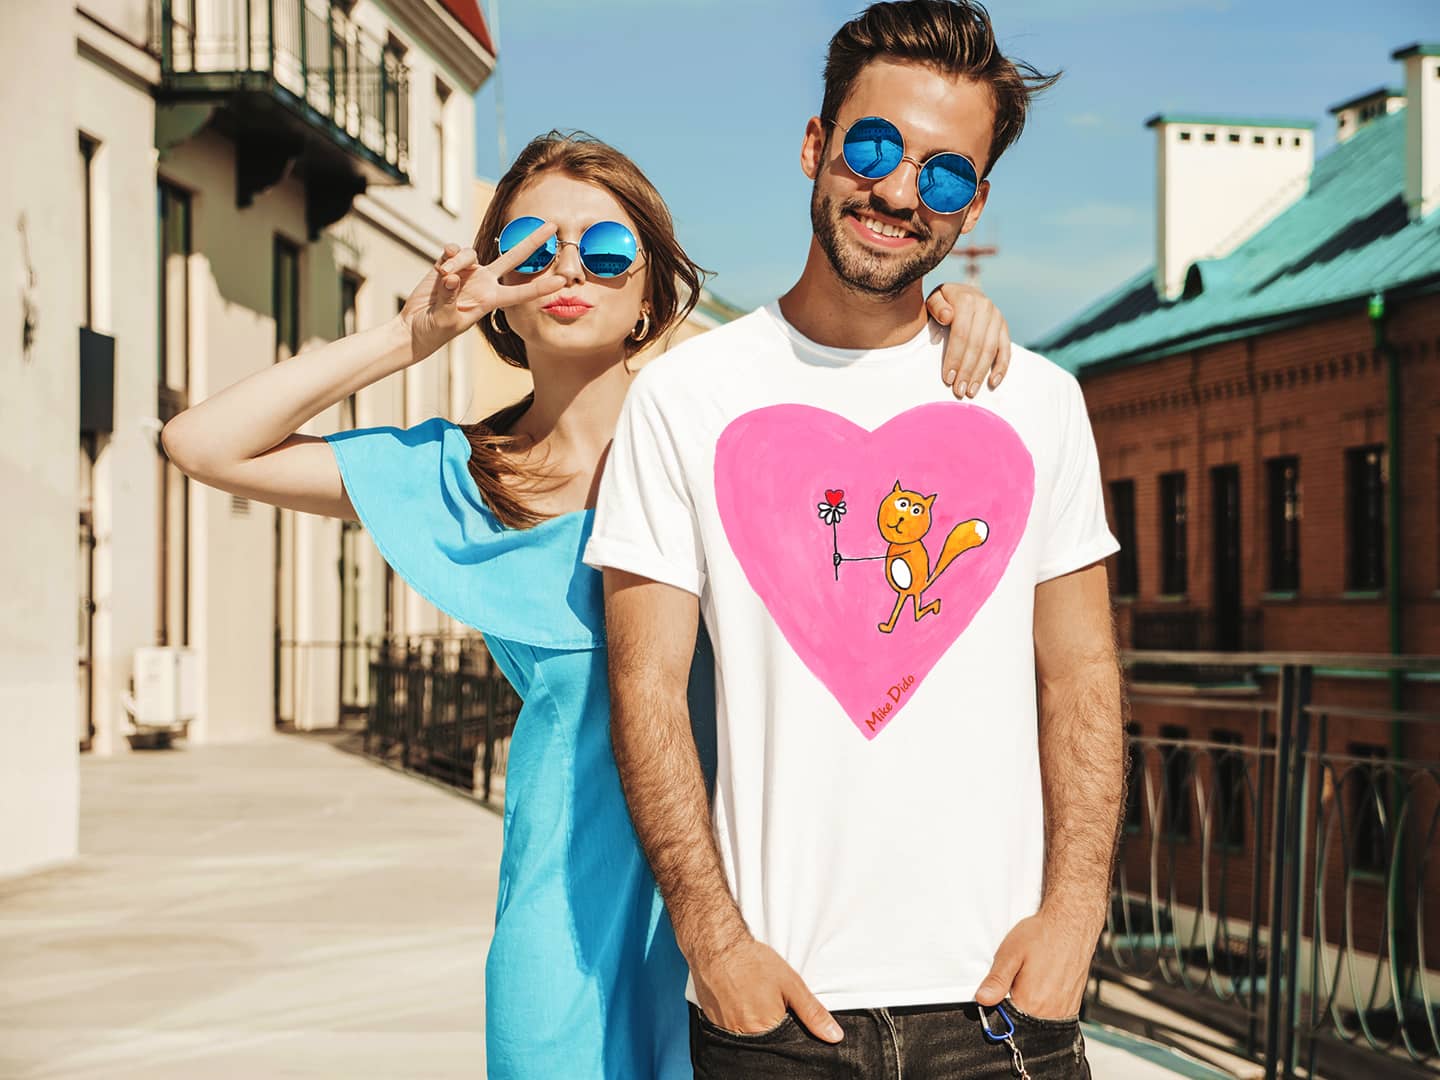 Designer T-Shirt with a Pink Heart And Yellow Cat by Mike Dido